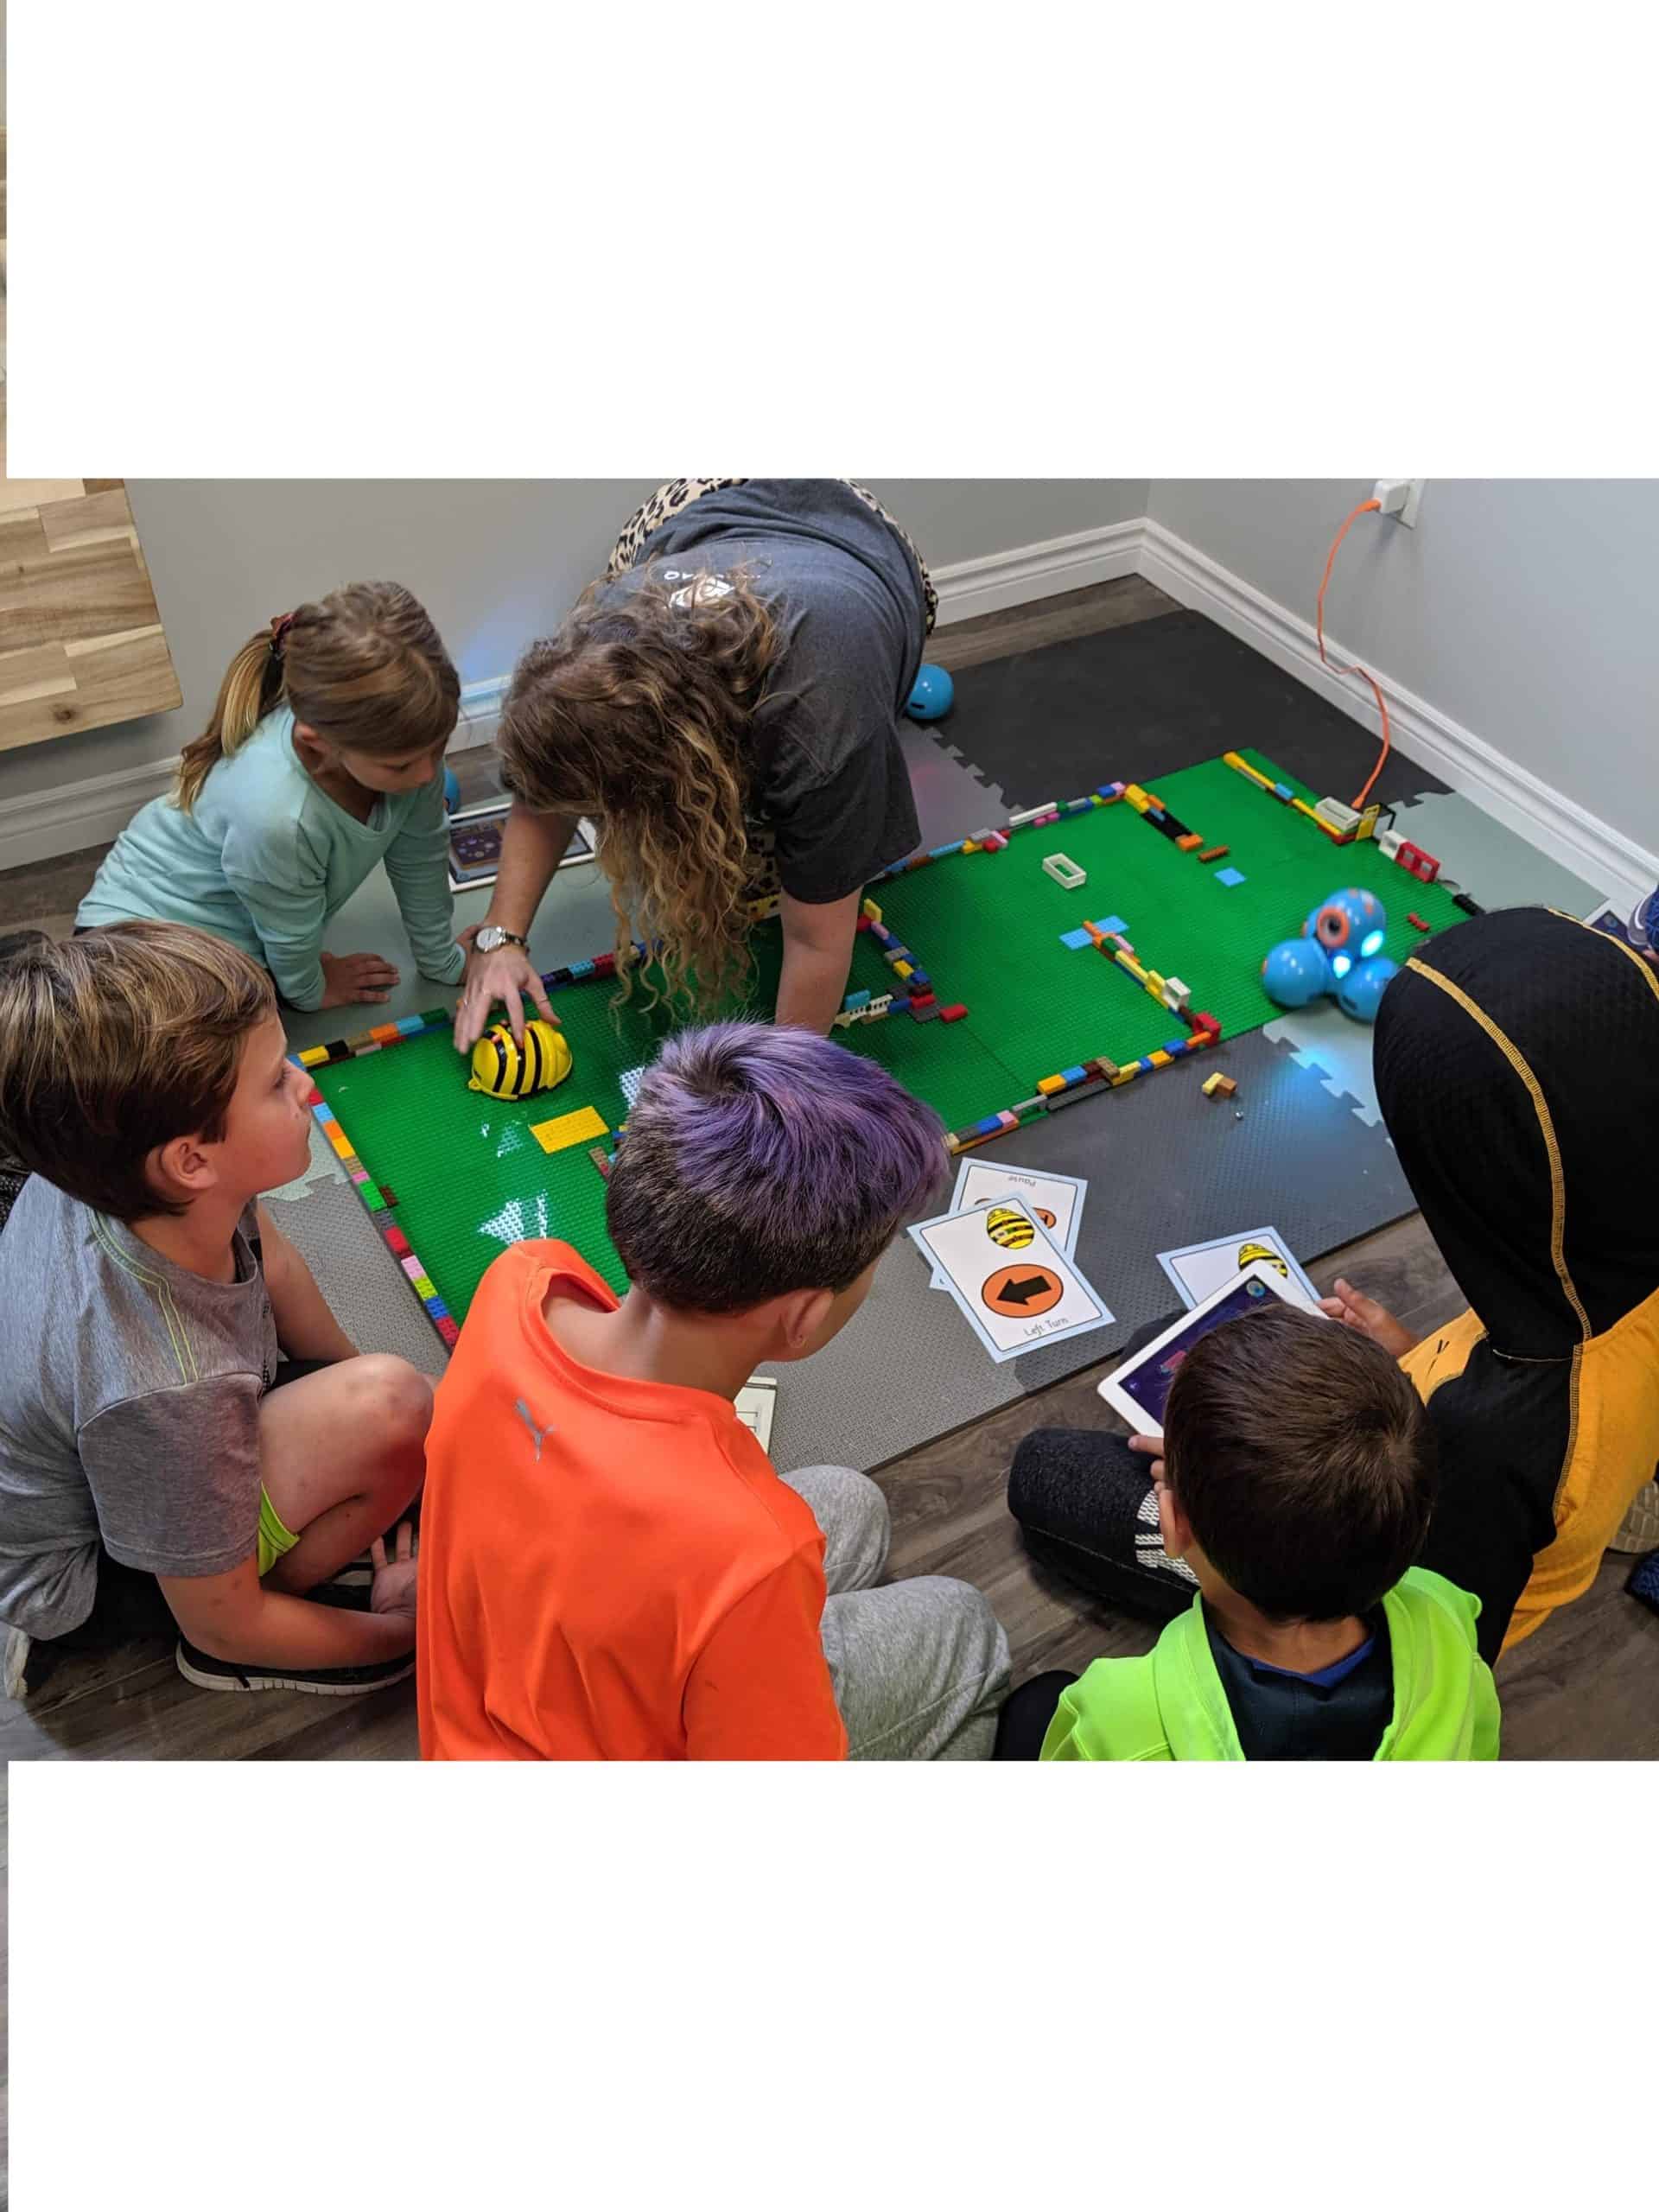 5 kids kneeling around a mat and building a lego obstacle courses for robots with an instructor kneeling beside